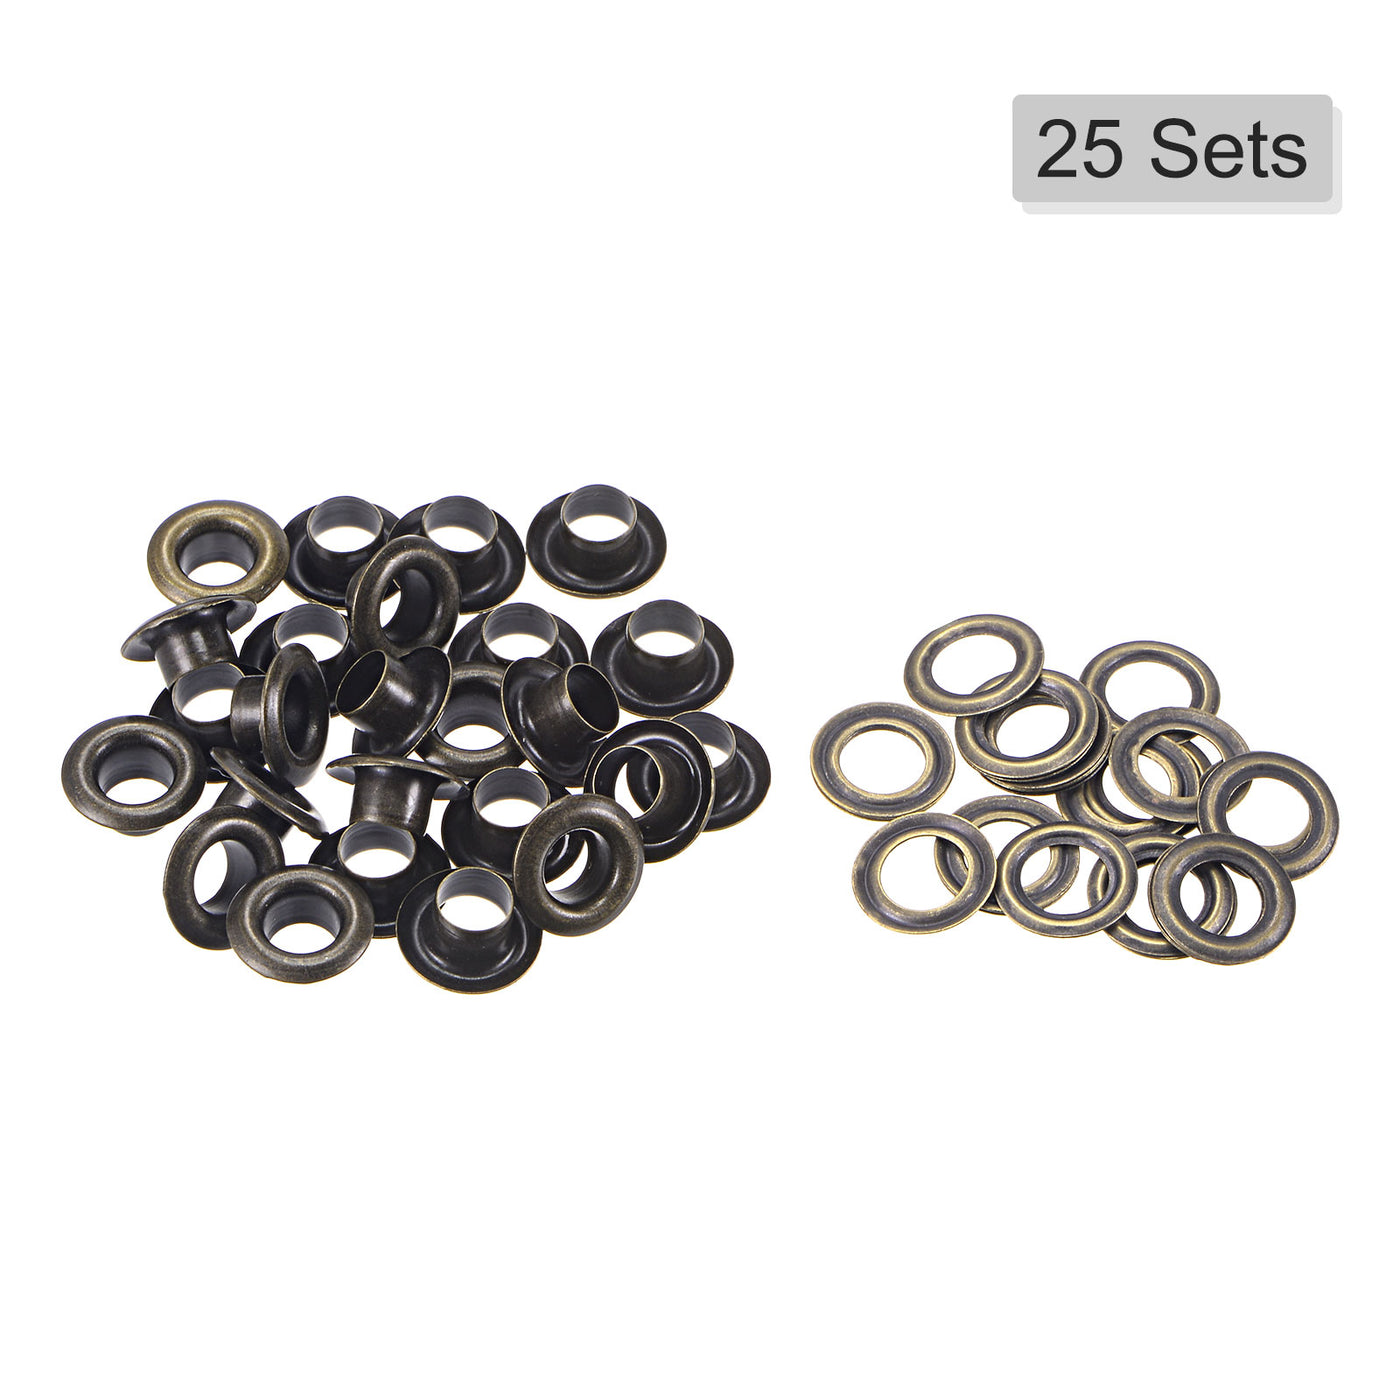 uxcell Uxcell 25Set 5.5mm Hole Copper Grommets Eyelets Bronze Tone for Fabric Leather